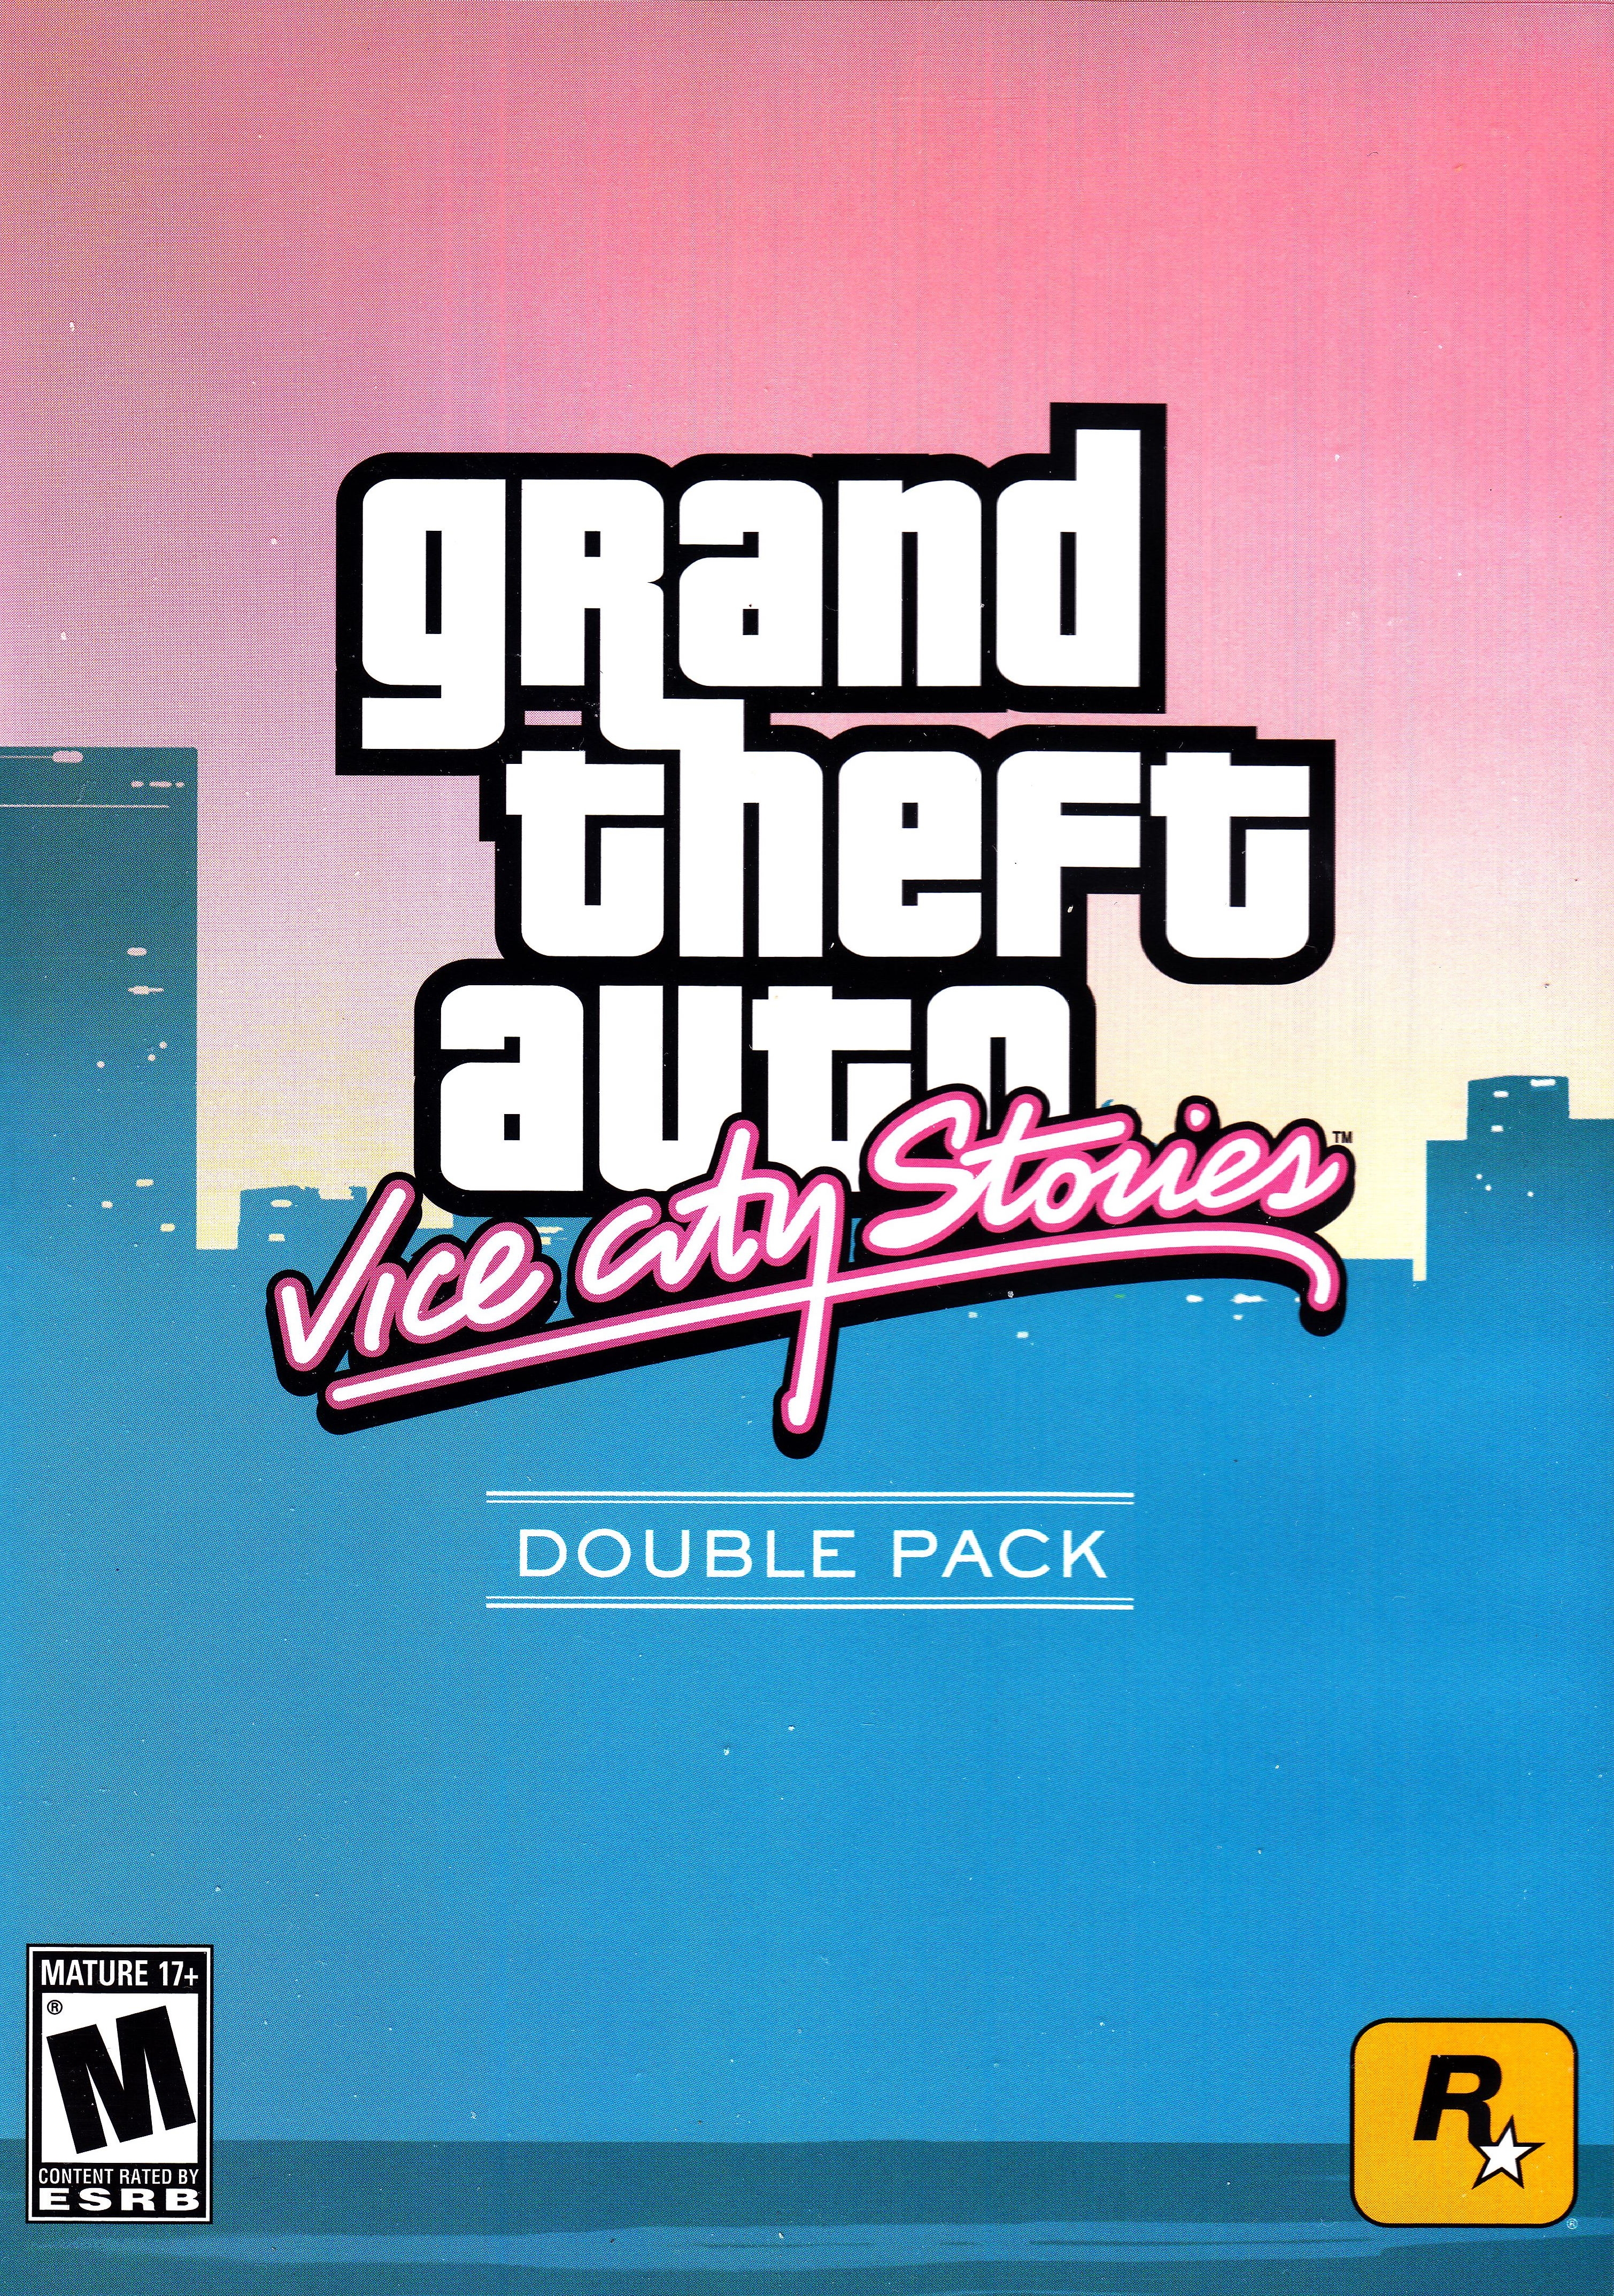 The box art for the double pack featuring GTA III and Vice City on